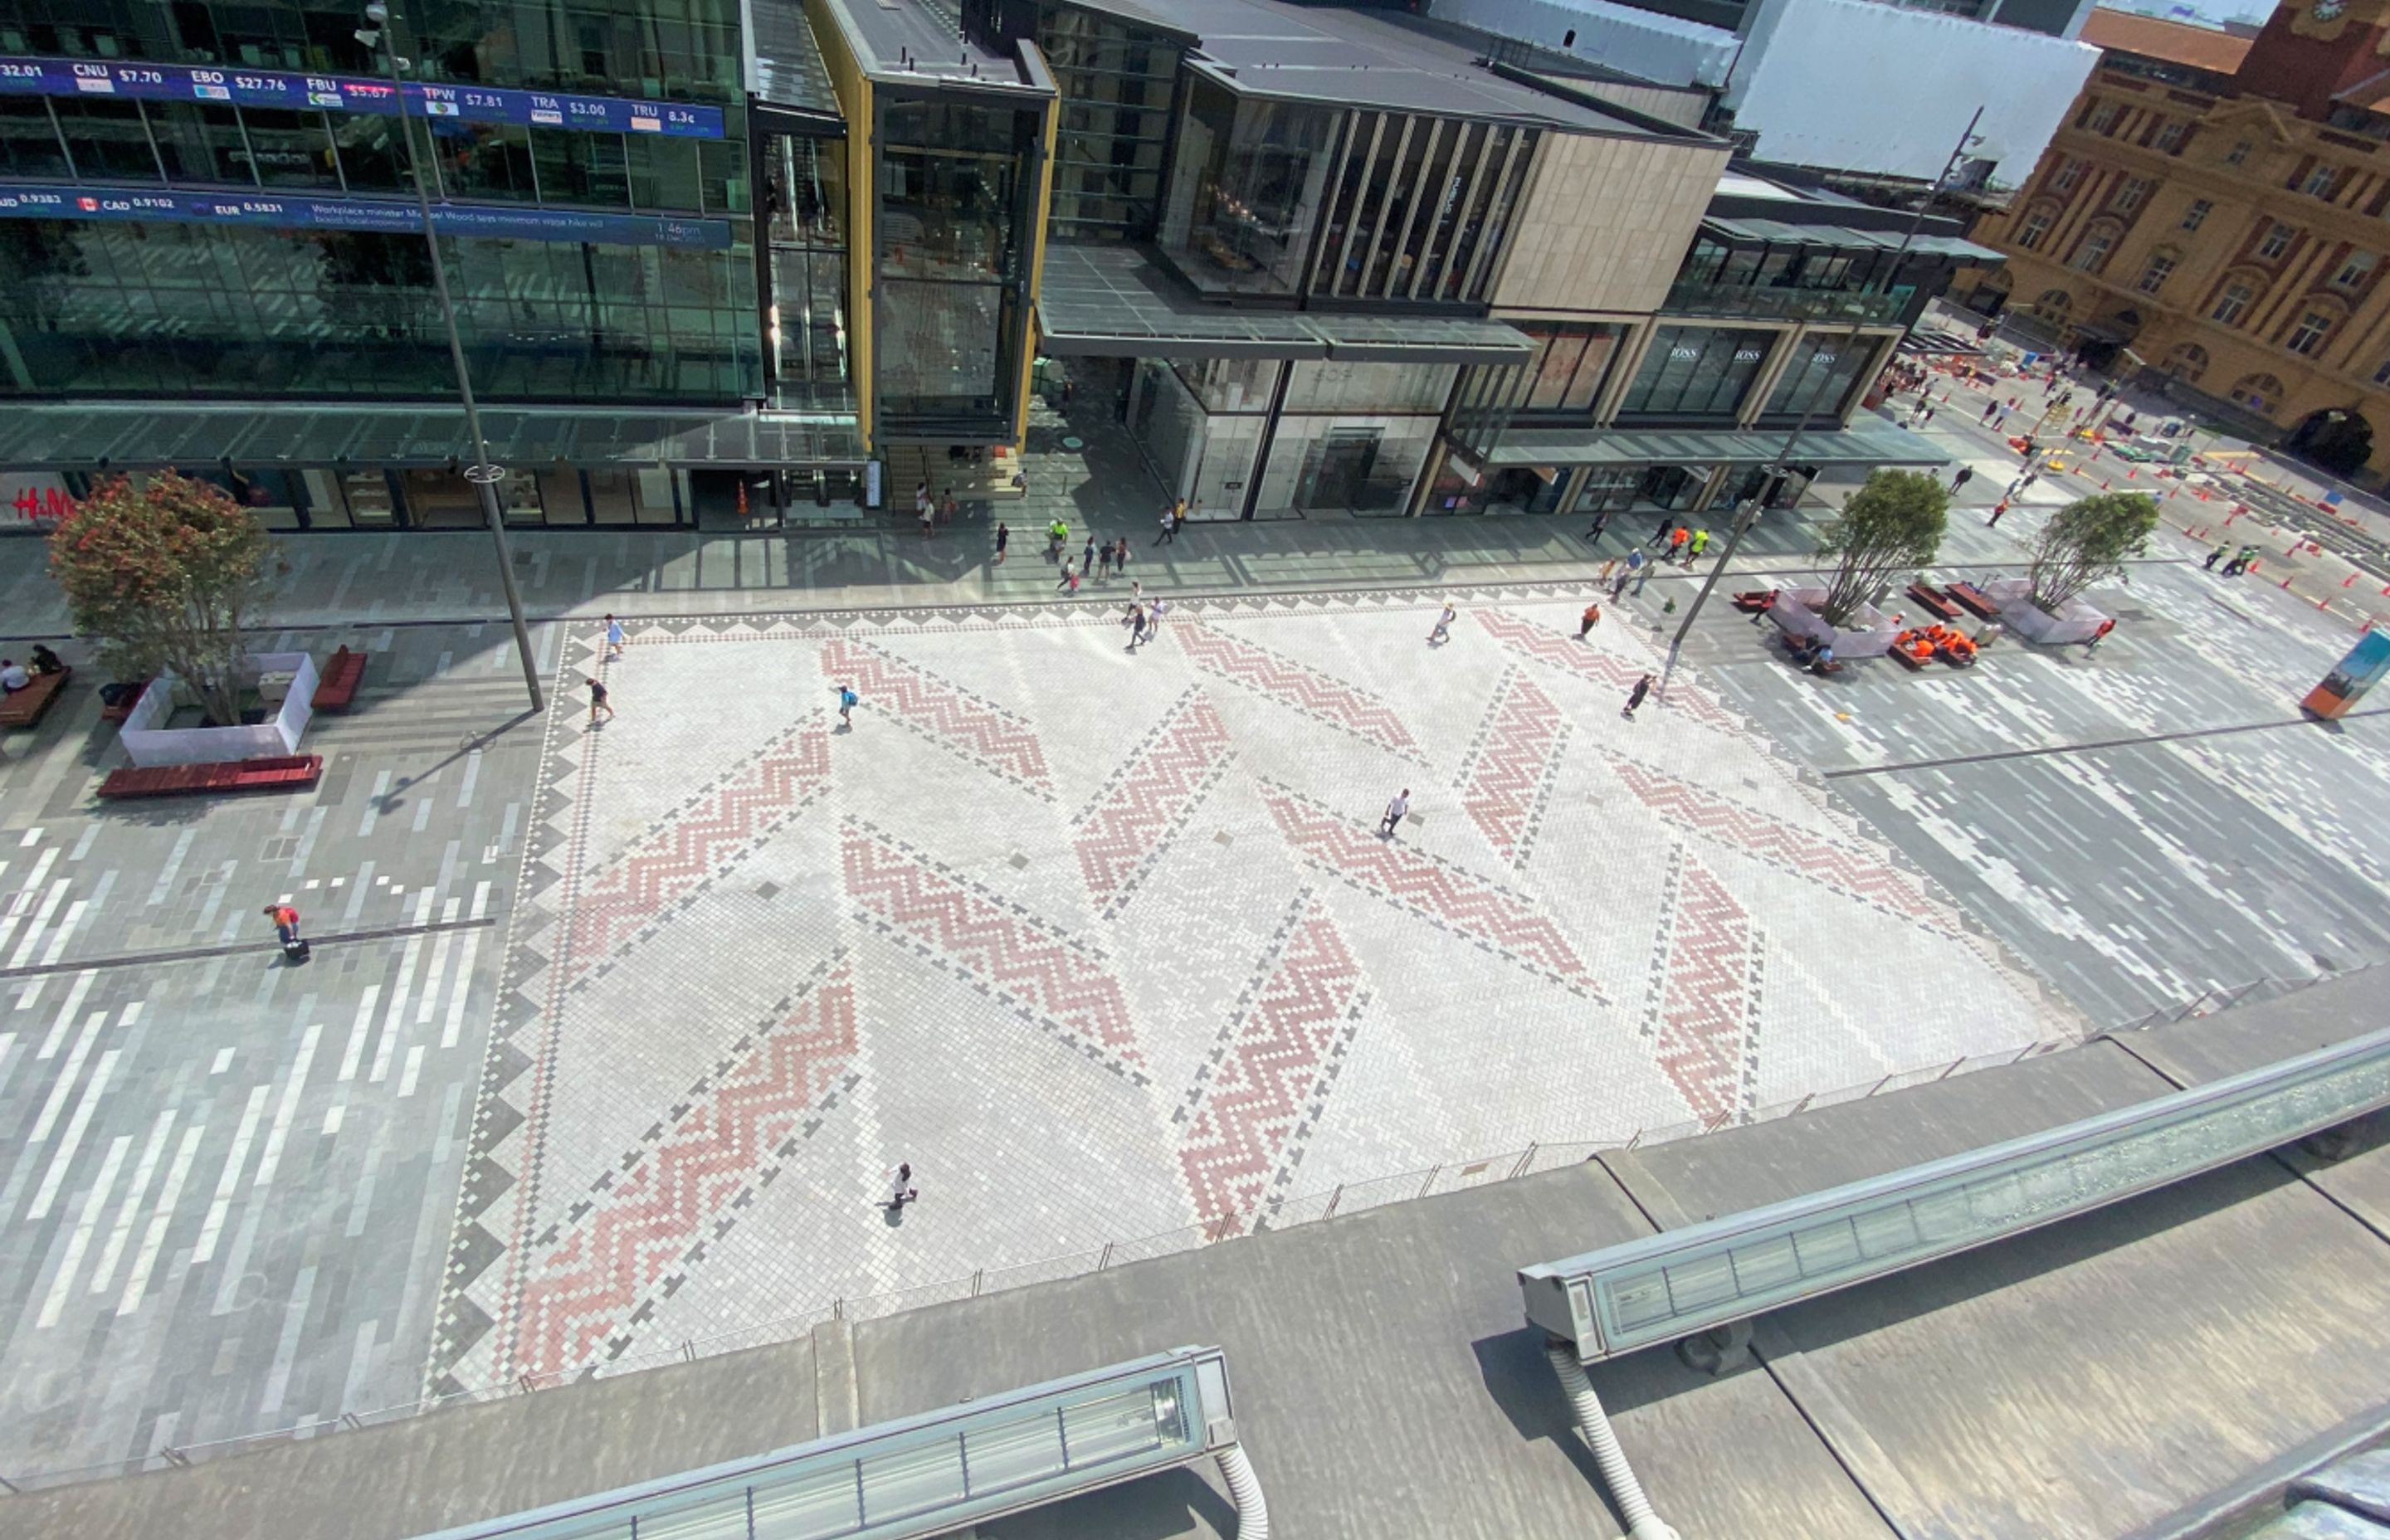 Comprising more than 137,000 pavers, the new Te Komititanga Square in Auckland, features a wharariki (welcome mat) design in the centre.